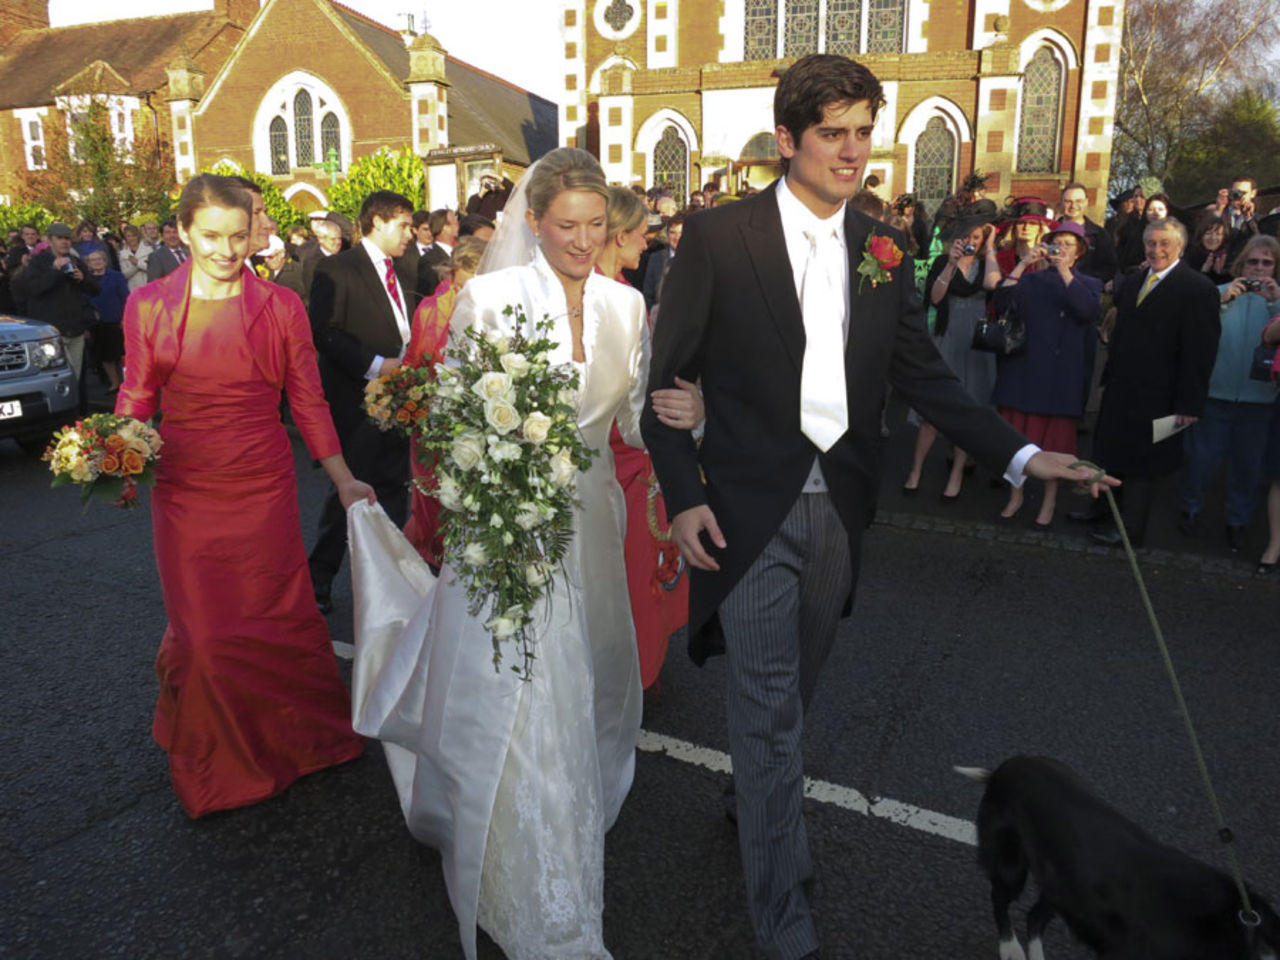 Alastair Cook, the England one-day captain, was married on New Year's Eve, Stewkley, England, December 31, 2011